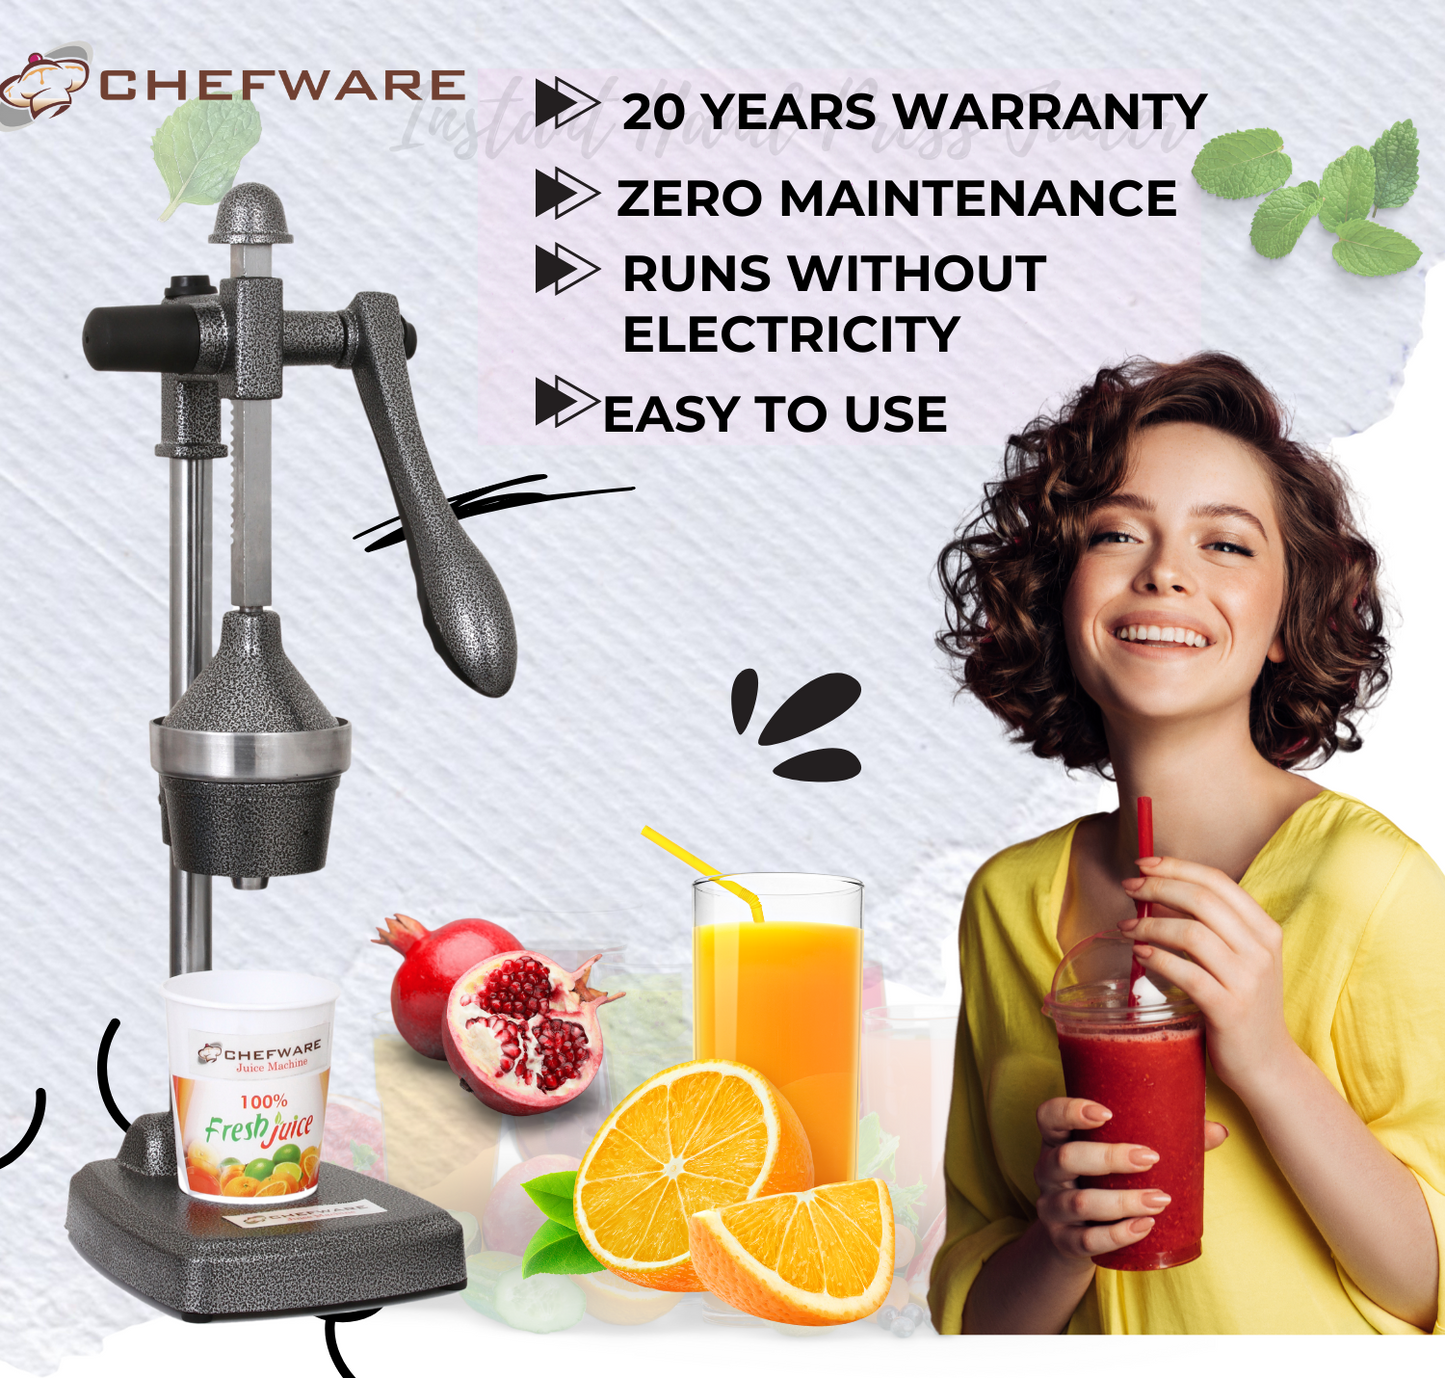 CHEFWARE Aluminum Instant Hand Press Citrus Fruits and Vegetable Juicer, Big, Black,100% Made In India (Juice Pro Antique Silver)…